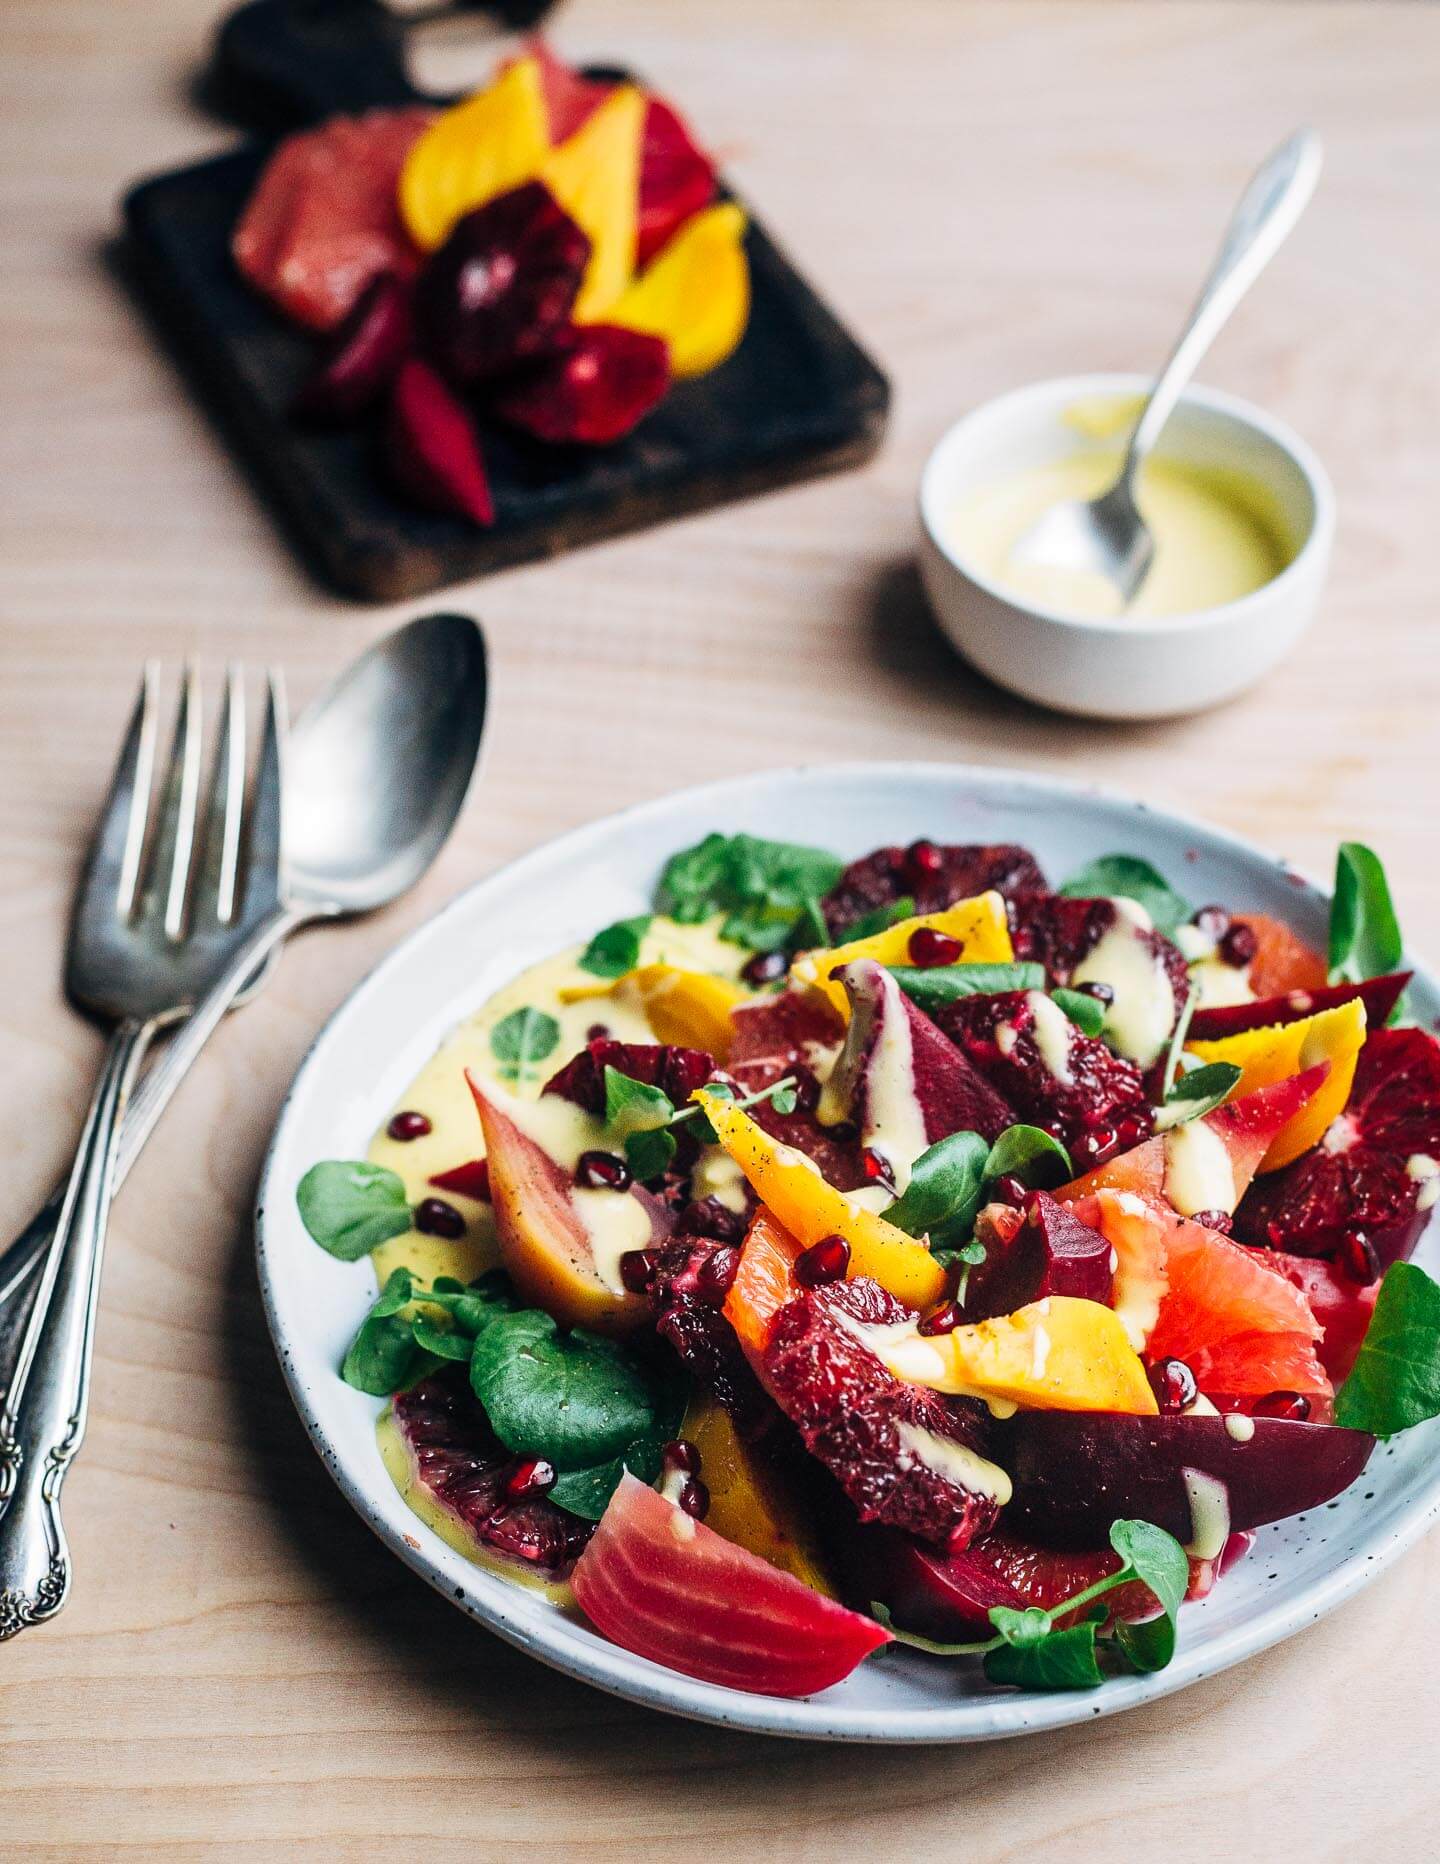 A jewel-toned winter orange and beet salad with layers of Cara Cara and blood oranges, grapefruit segments, red, yellow and chioggia beets, and a creamy homemade grapefruit aioli. 